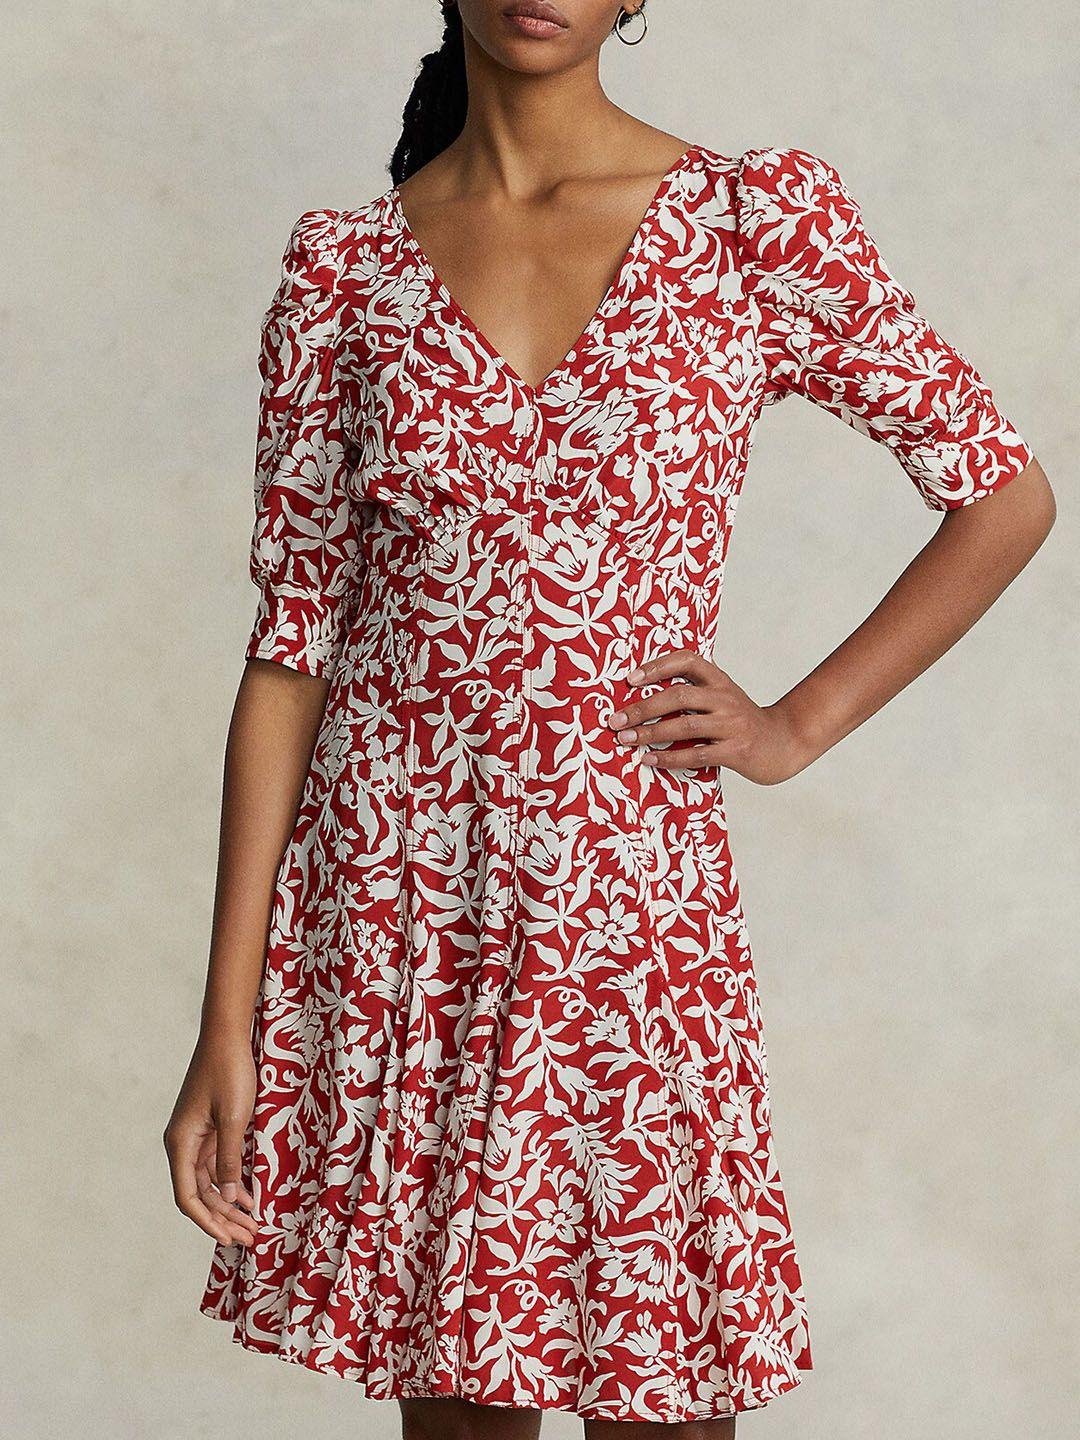 polo ralph lauren puff sleeves floral printed v-neck fit & flare cotton dress